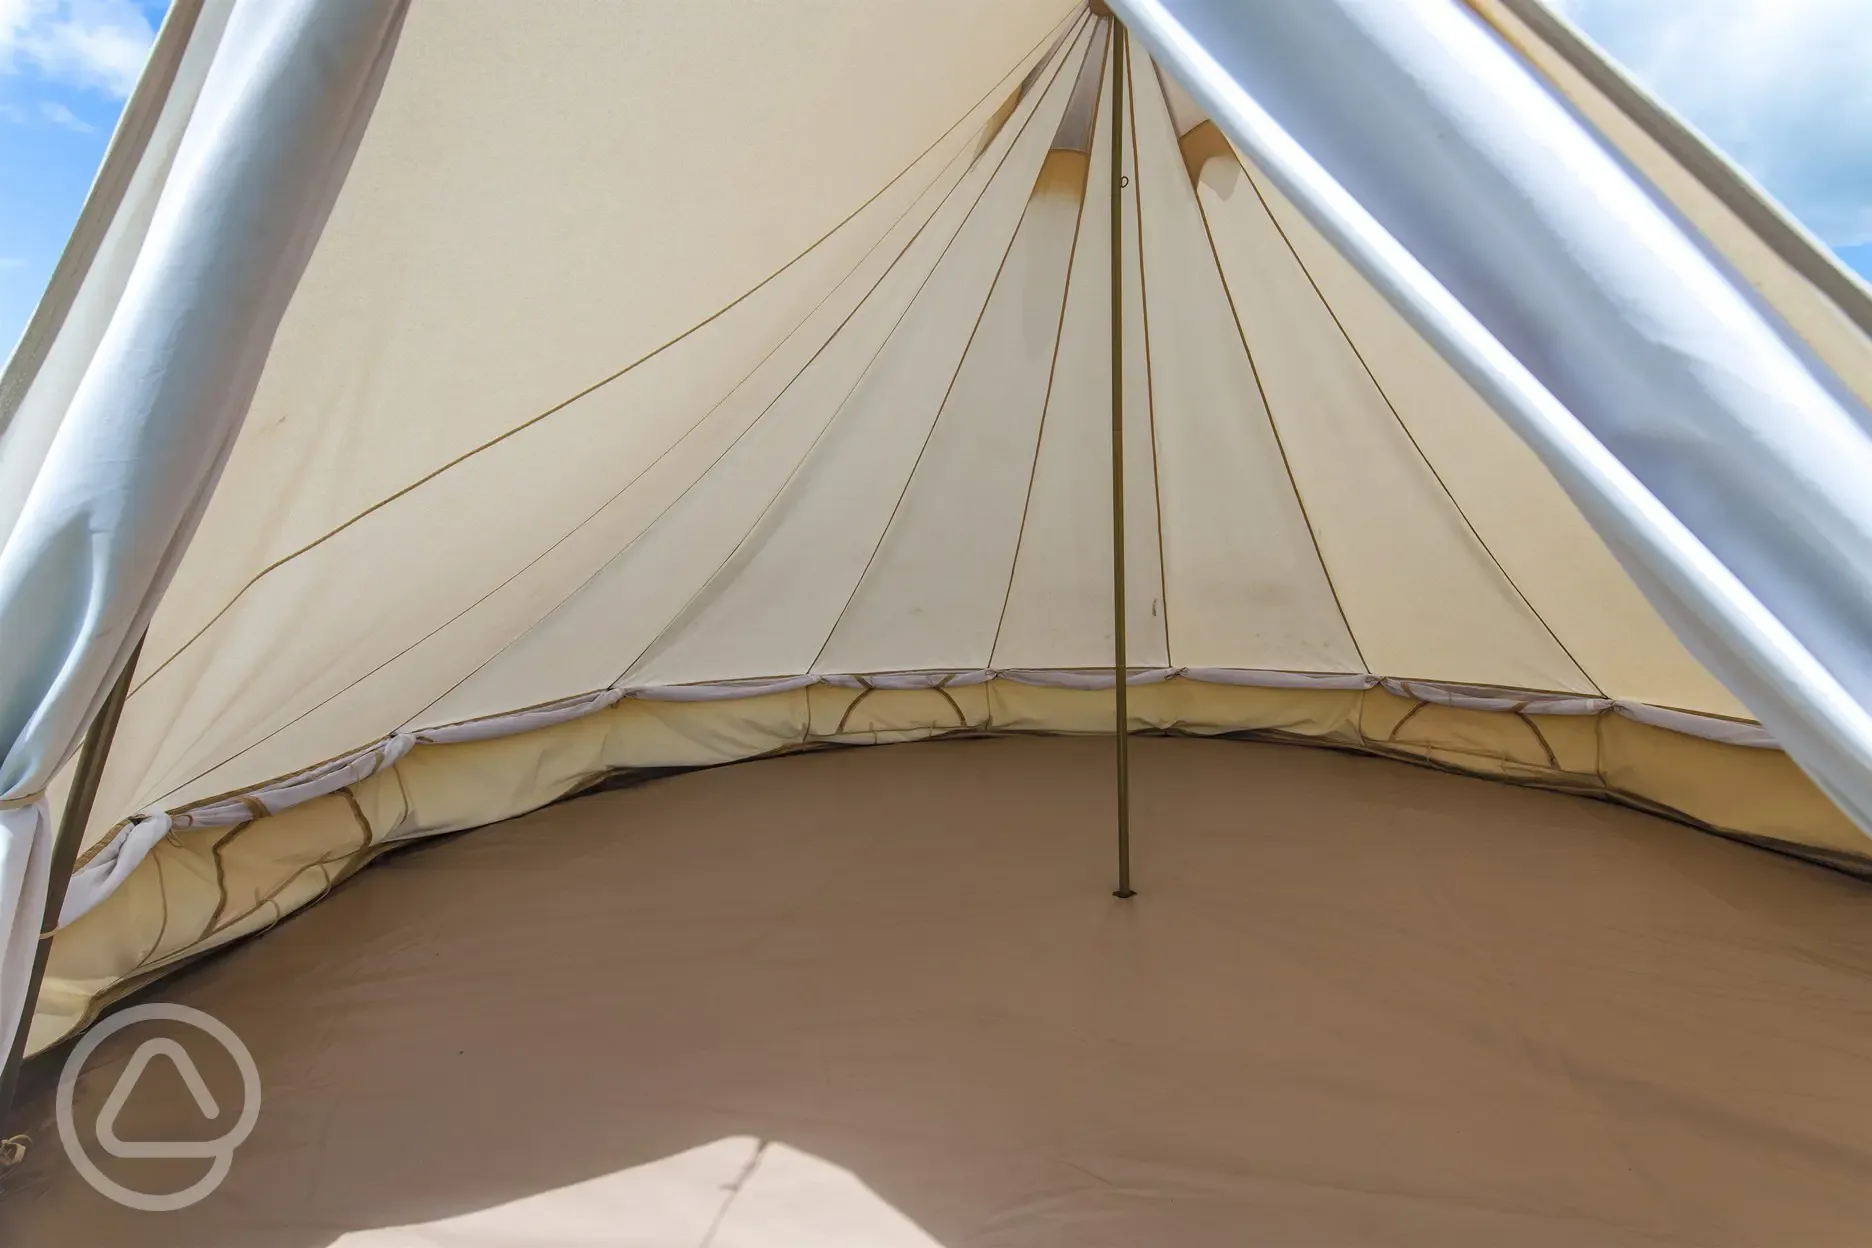 Unfurnished bell tent